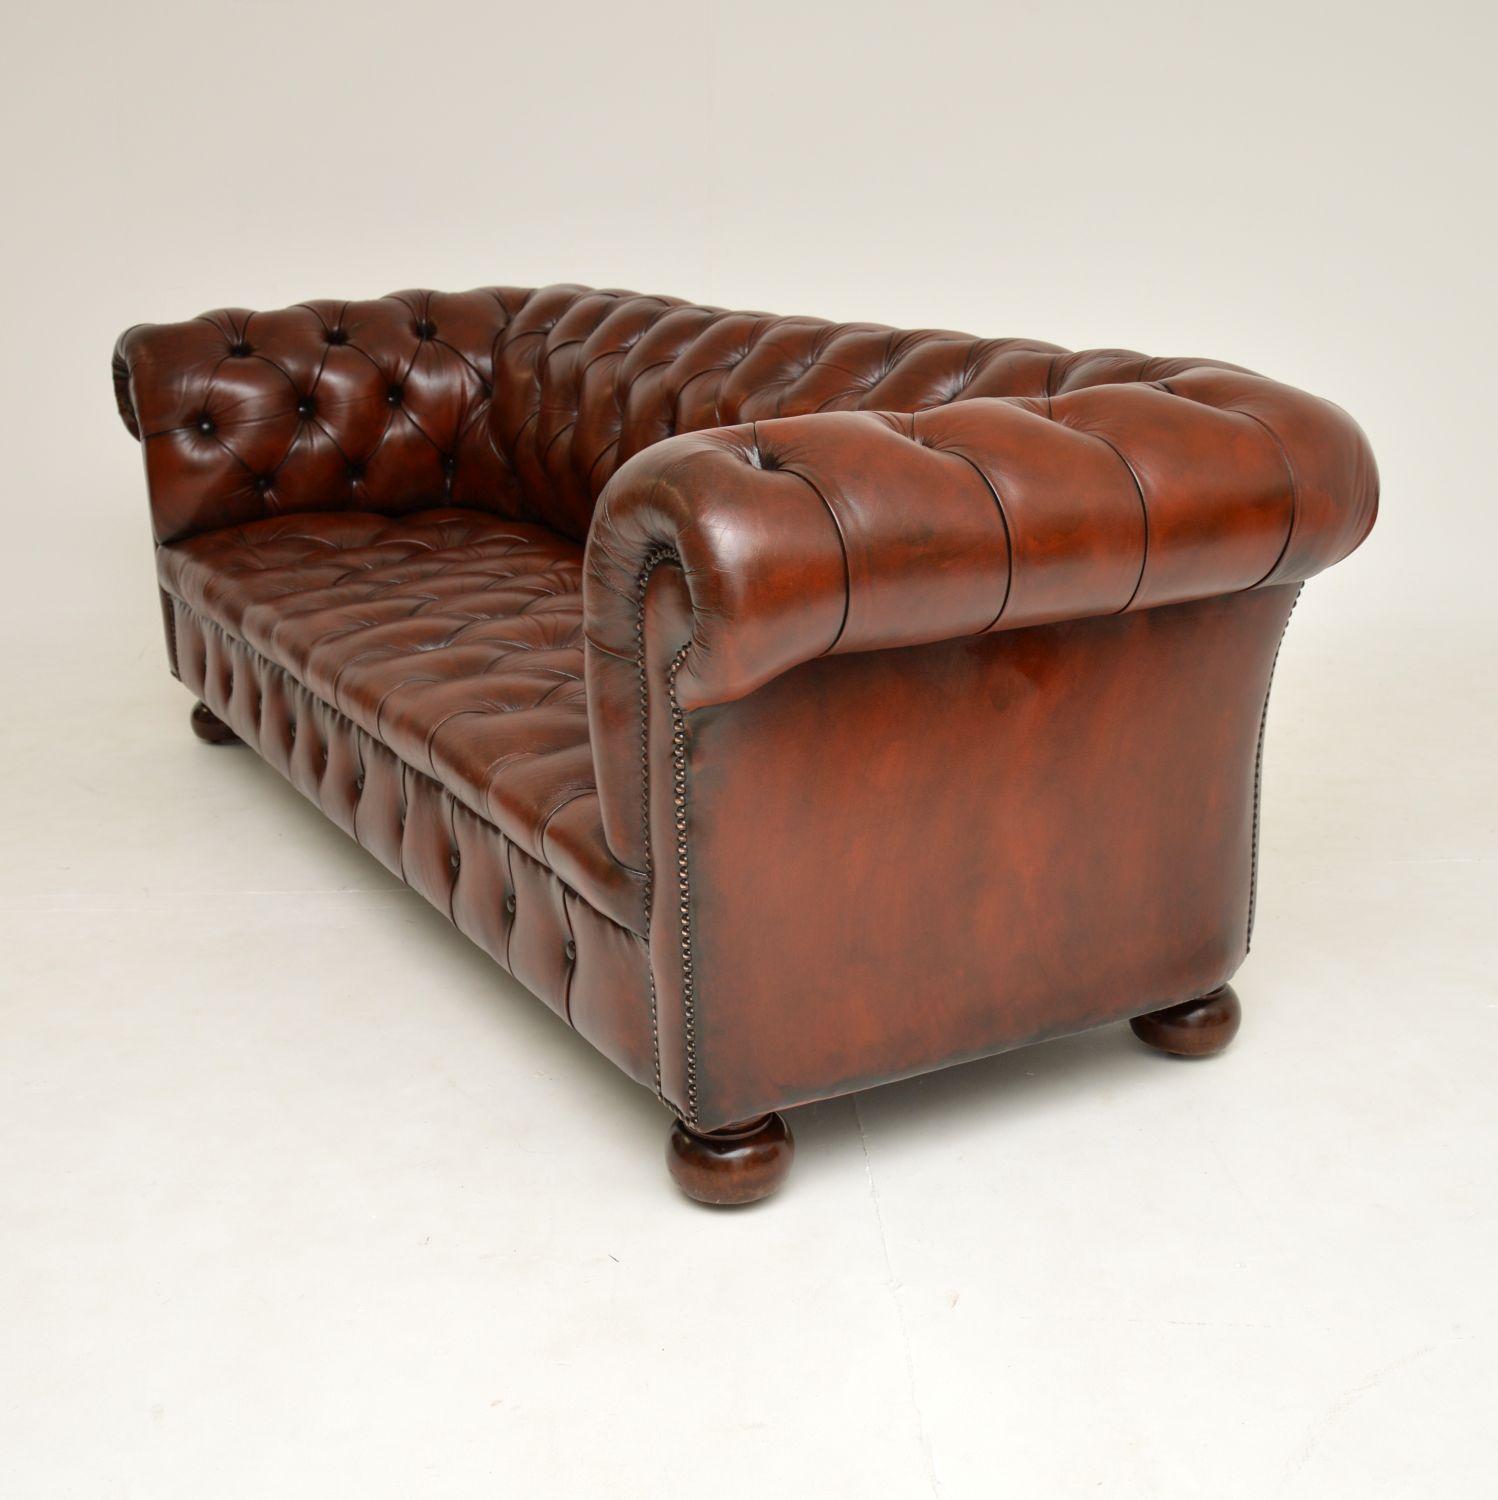 English Antique Victorian Style Leather Chesterfield Sofa